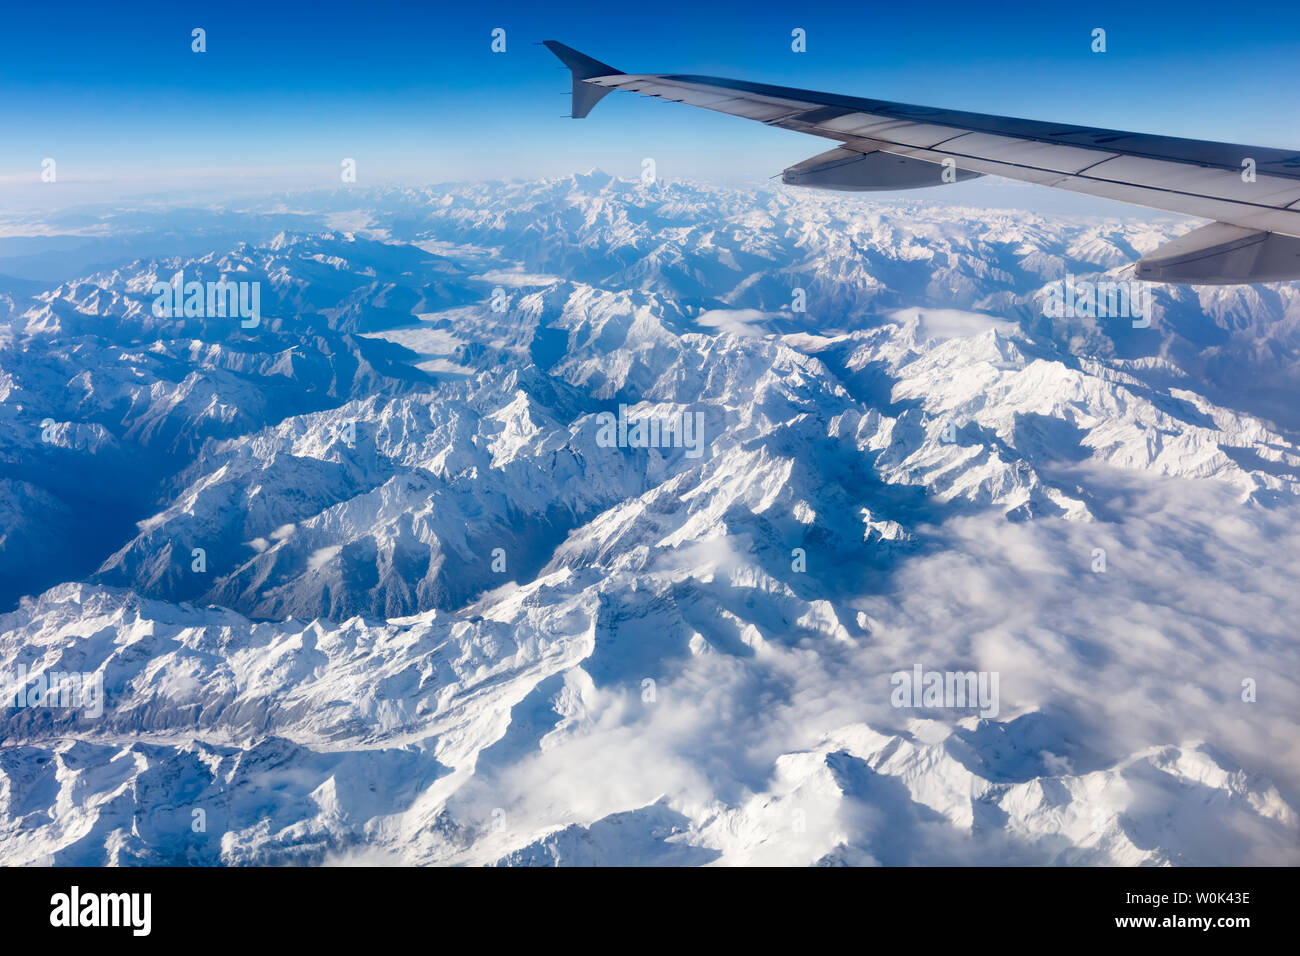 On a flight from Chengdu to Lhasa, Tibet, the Hengduan Mountains, the highest snow mountain in the distance is Mount Gongga, the highest peak in Sichuan. Stock Photo